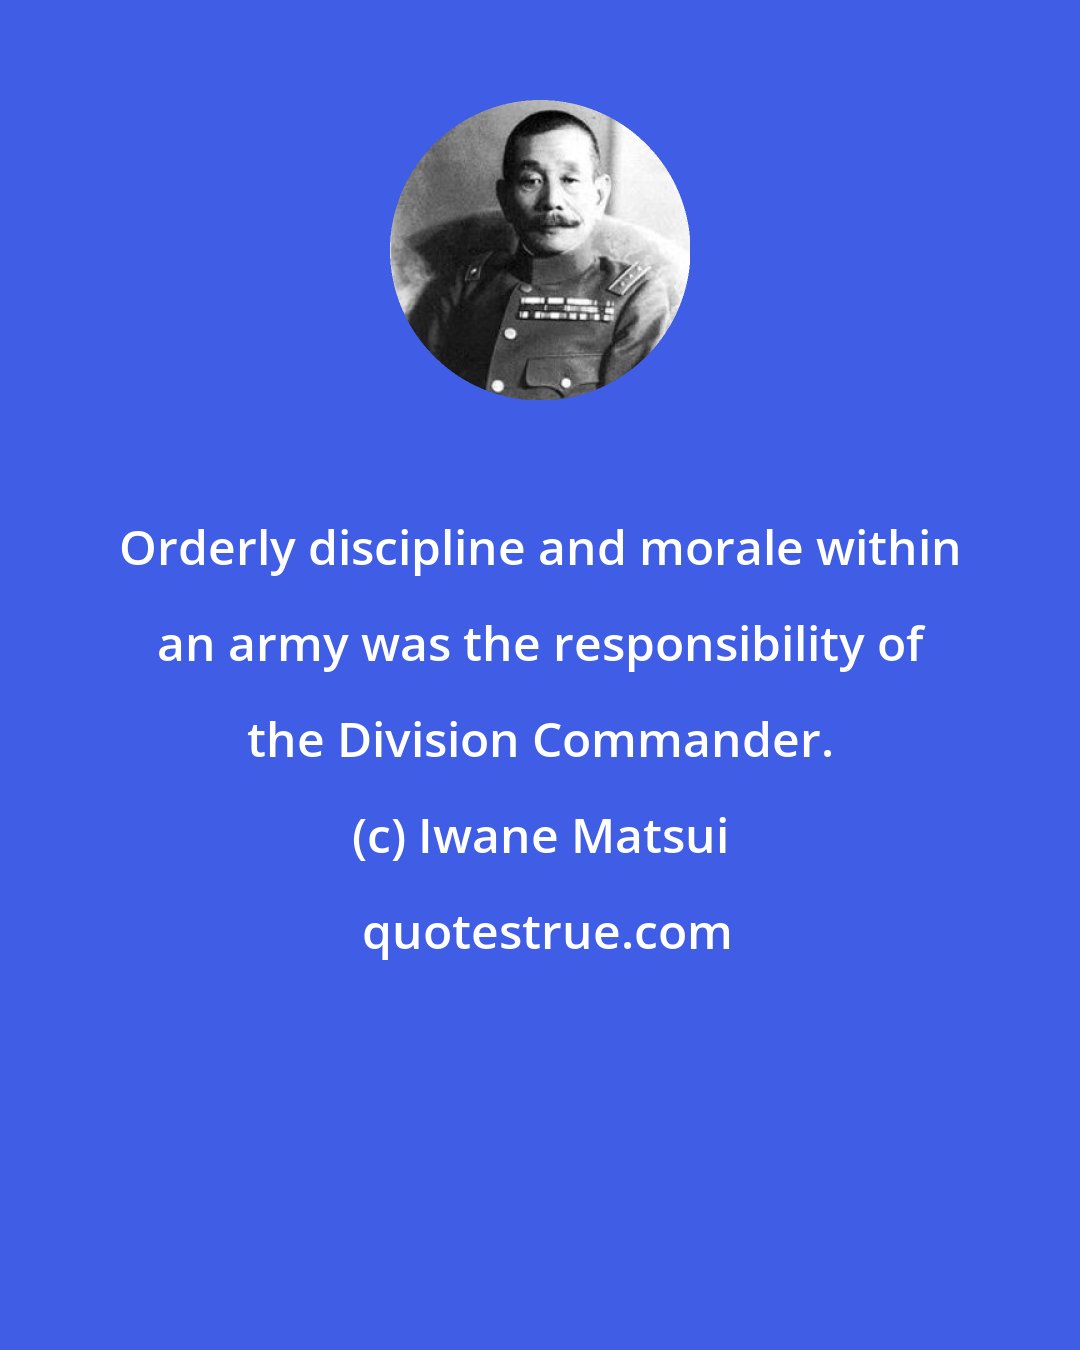 Iwane Matsui: Orderly discipline and morale within an army was the responsibility of the Division Commander.